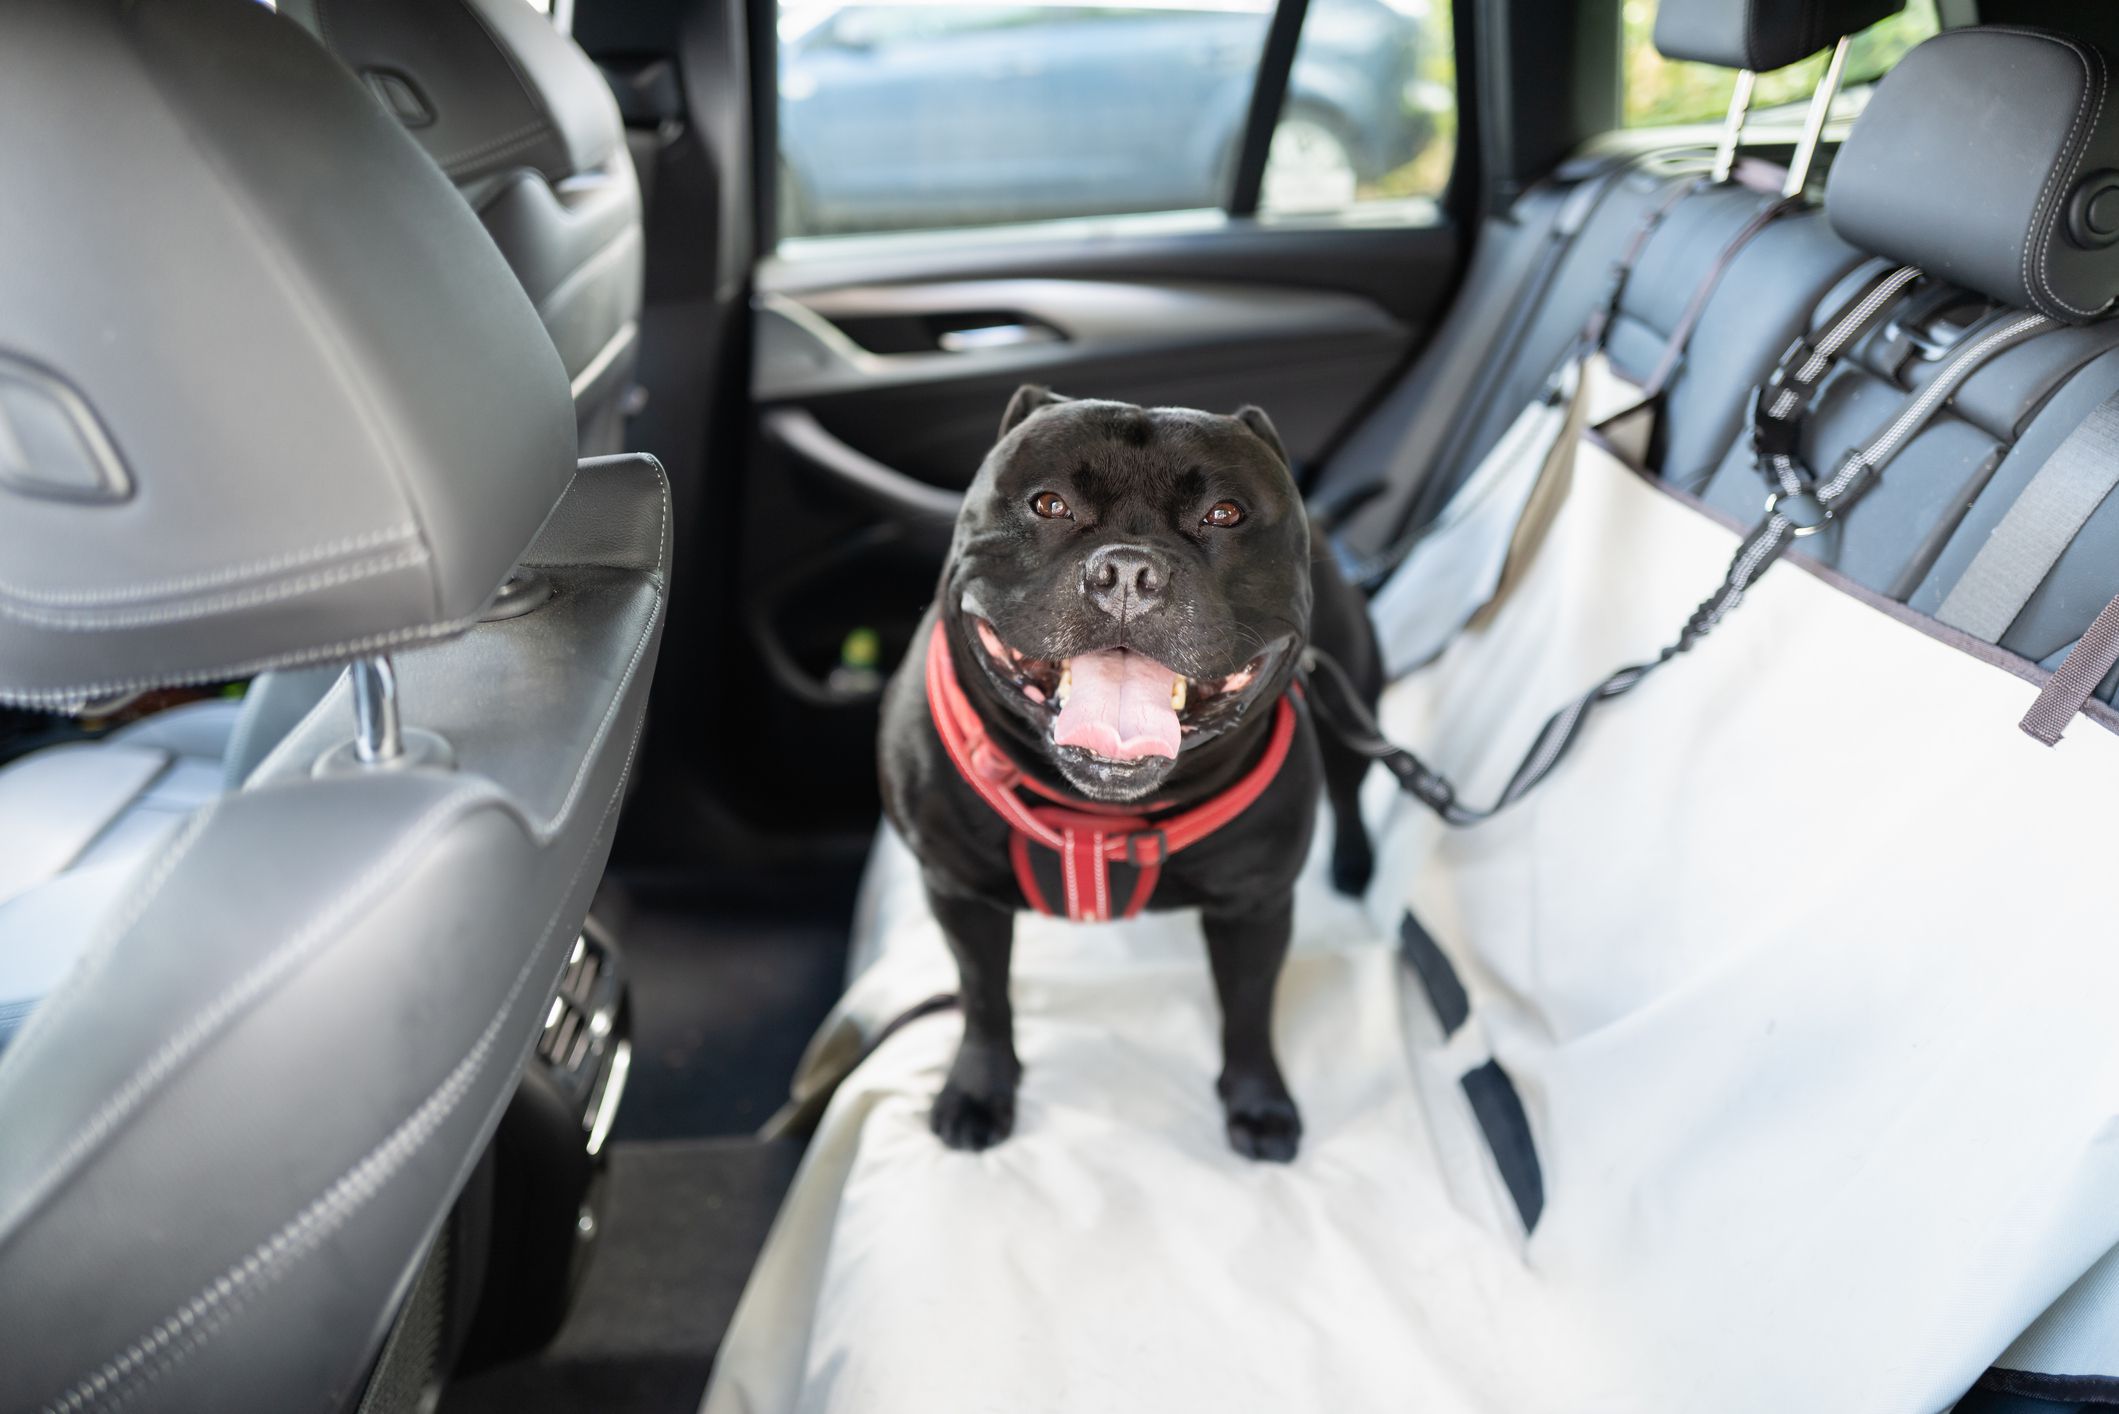 <p>If you’re driving, make sure you have everything you need to make sure your pet gets to your destination safely. Sure, this may cost you money upfront, but a proper pet seat belt or travel crate could save your pet’s life or prevent costly injuries in case of an accident.</p>